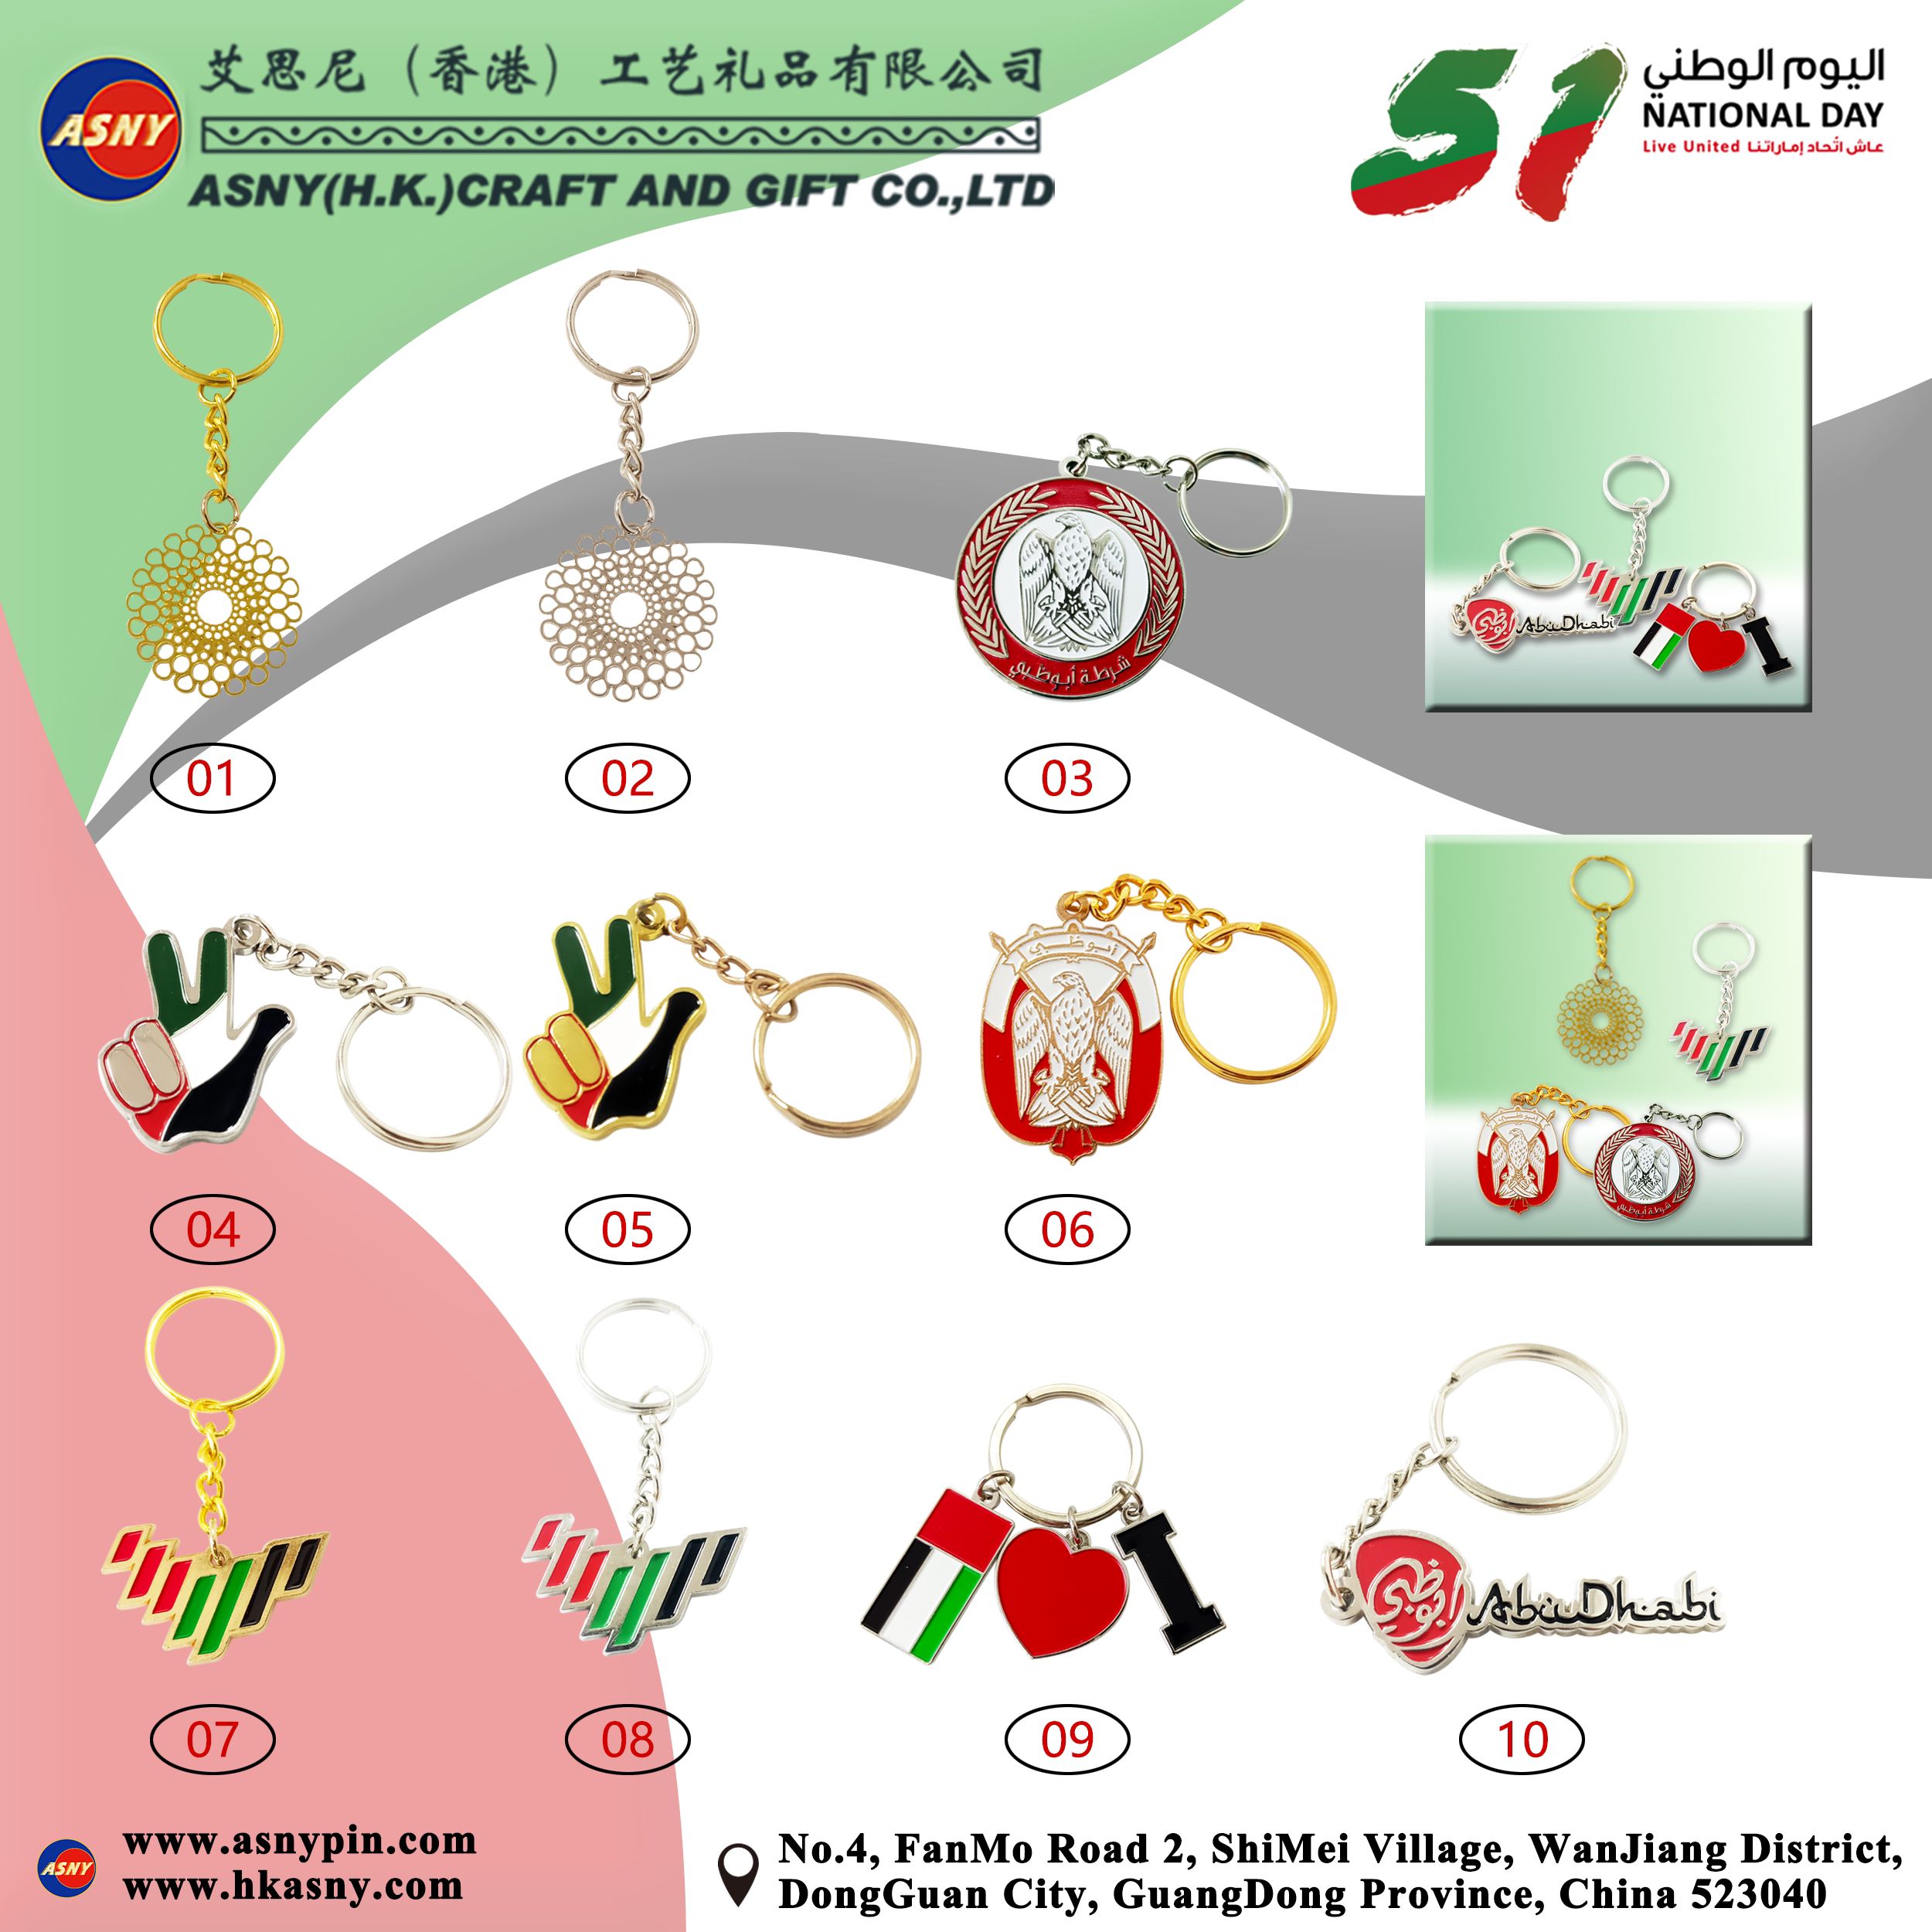 Product Catalog - UAE 51st National Day Collection (8)